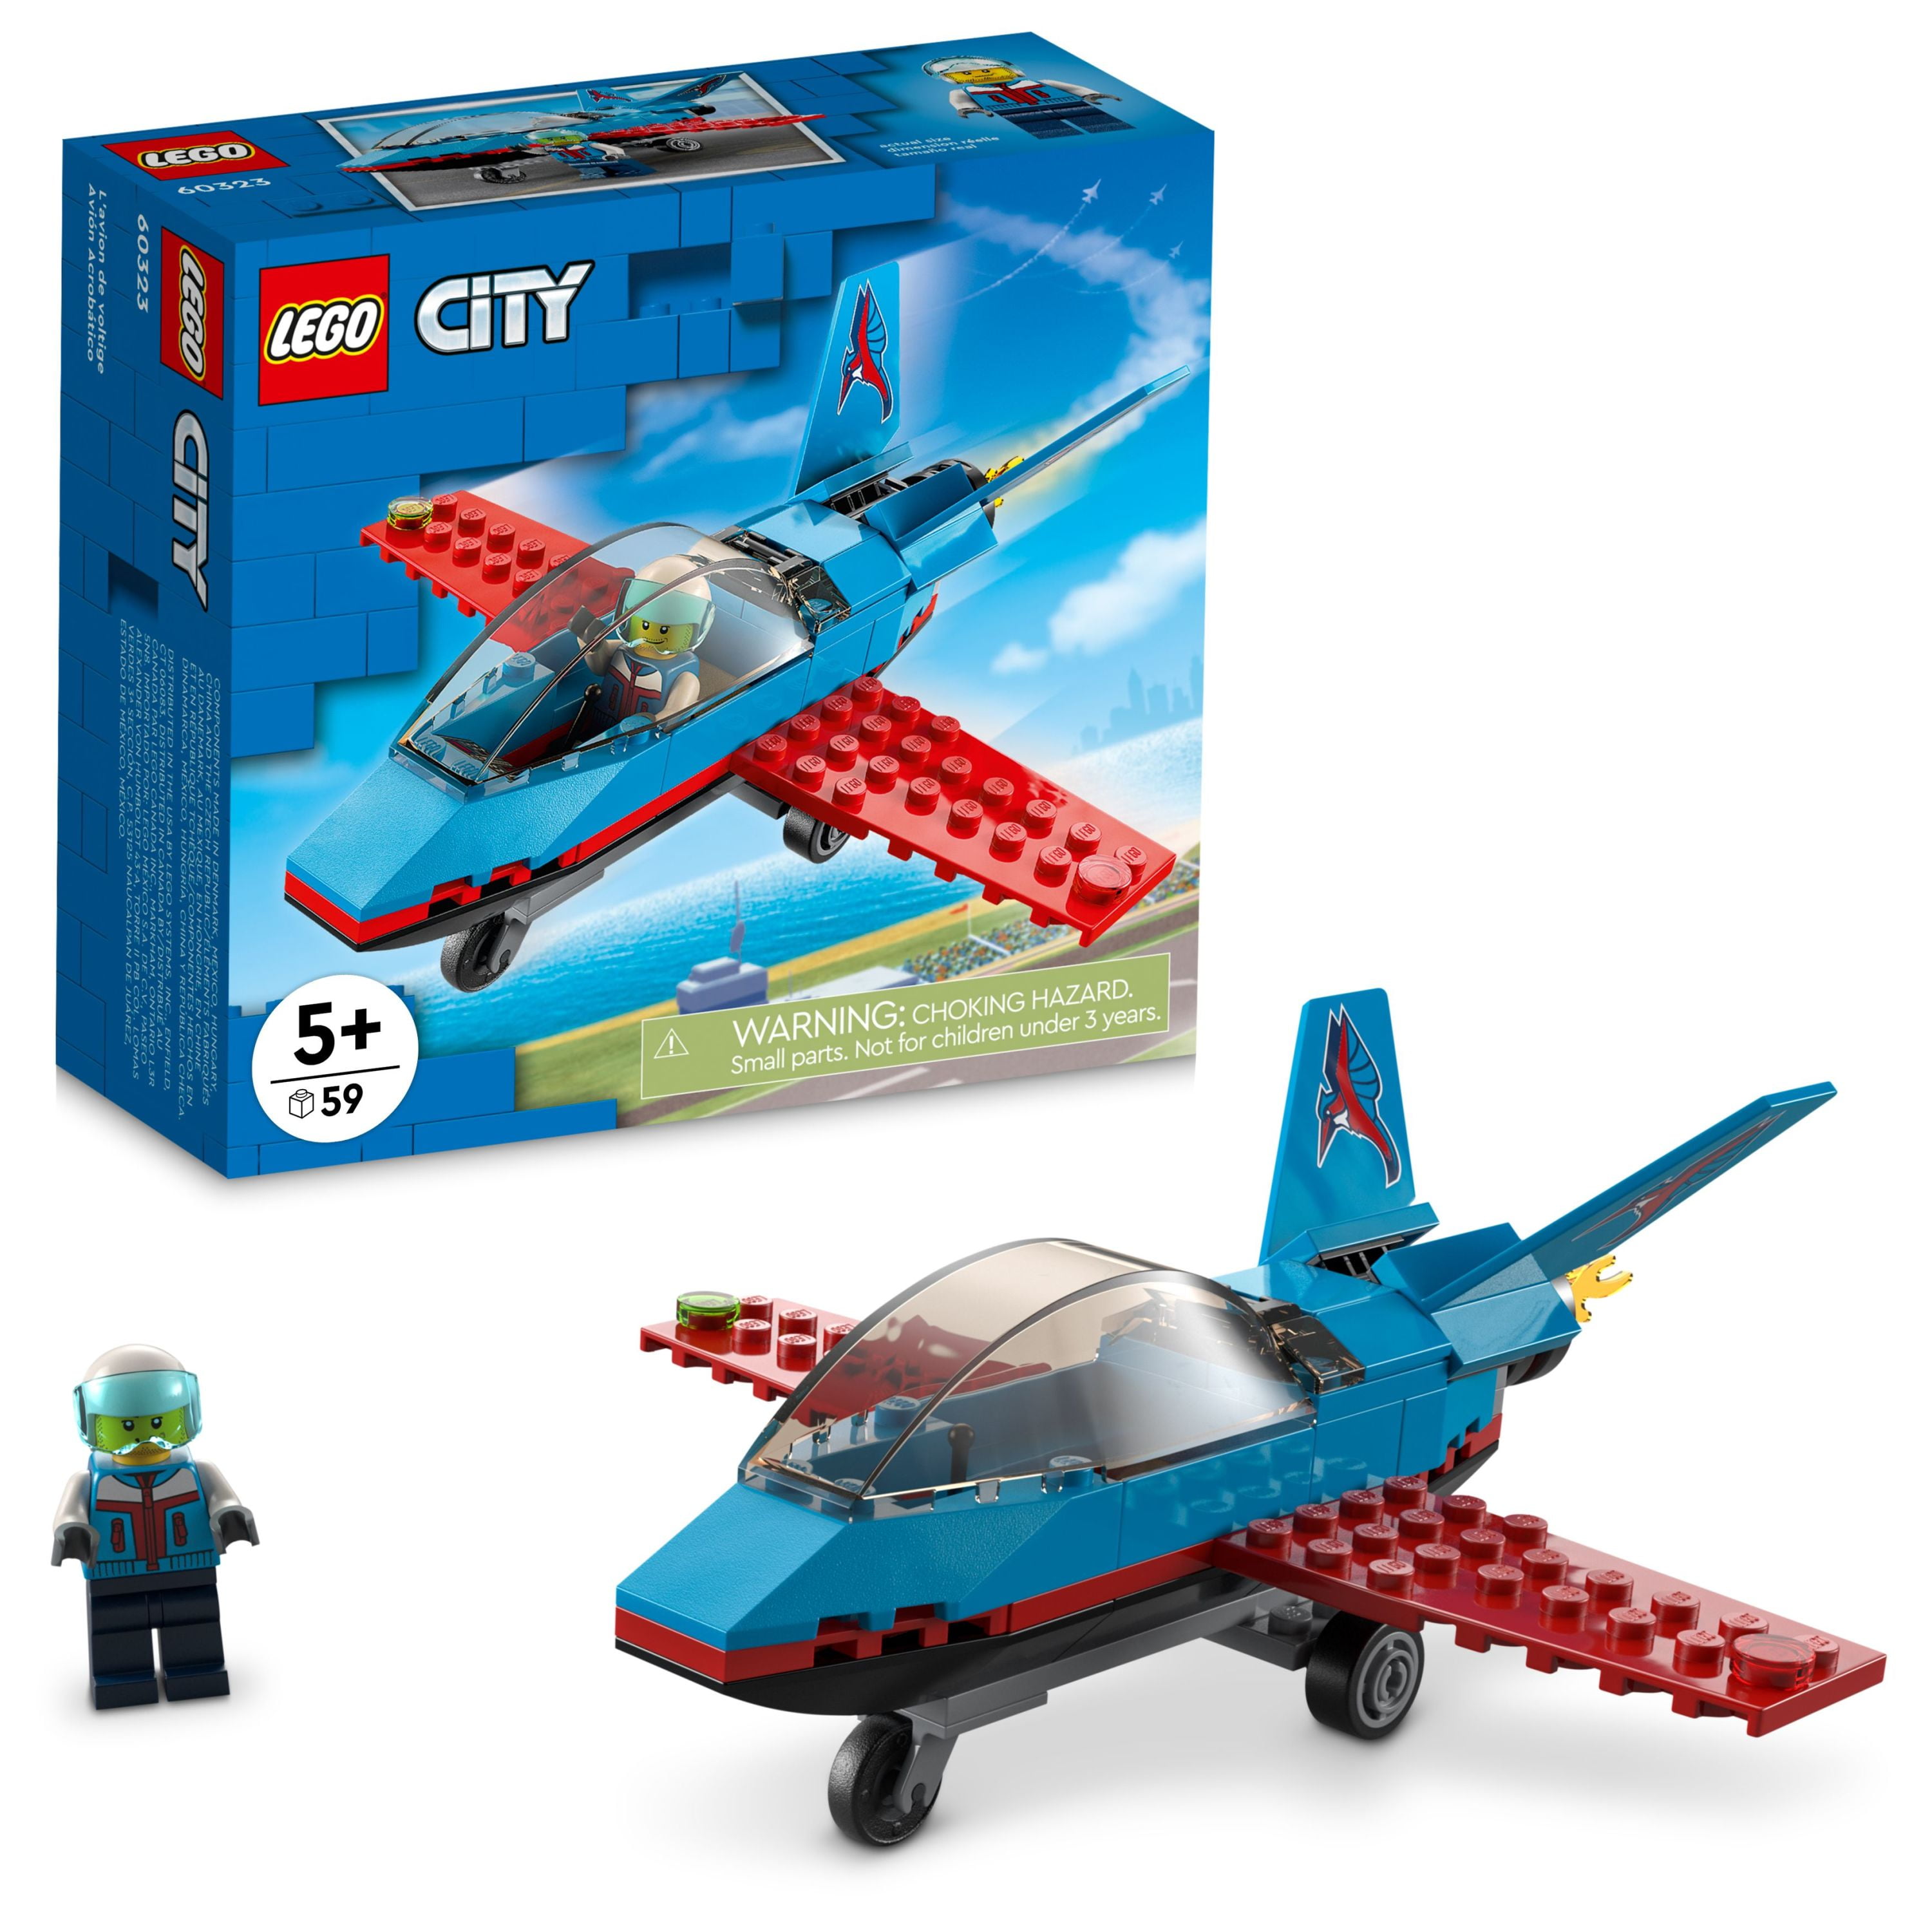 LEGO City Great Vehicles Stunt Plane 60323 Jet Aeroplane Toy, 2022 Building Set, Gifts for Kids, Boys and Girls 5 plus Years Old with Pilot Minifigure